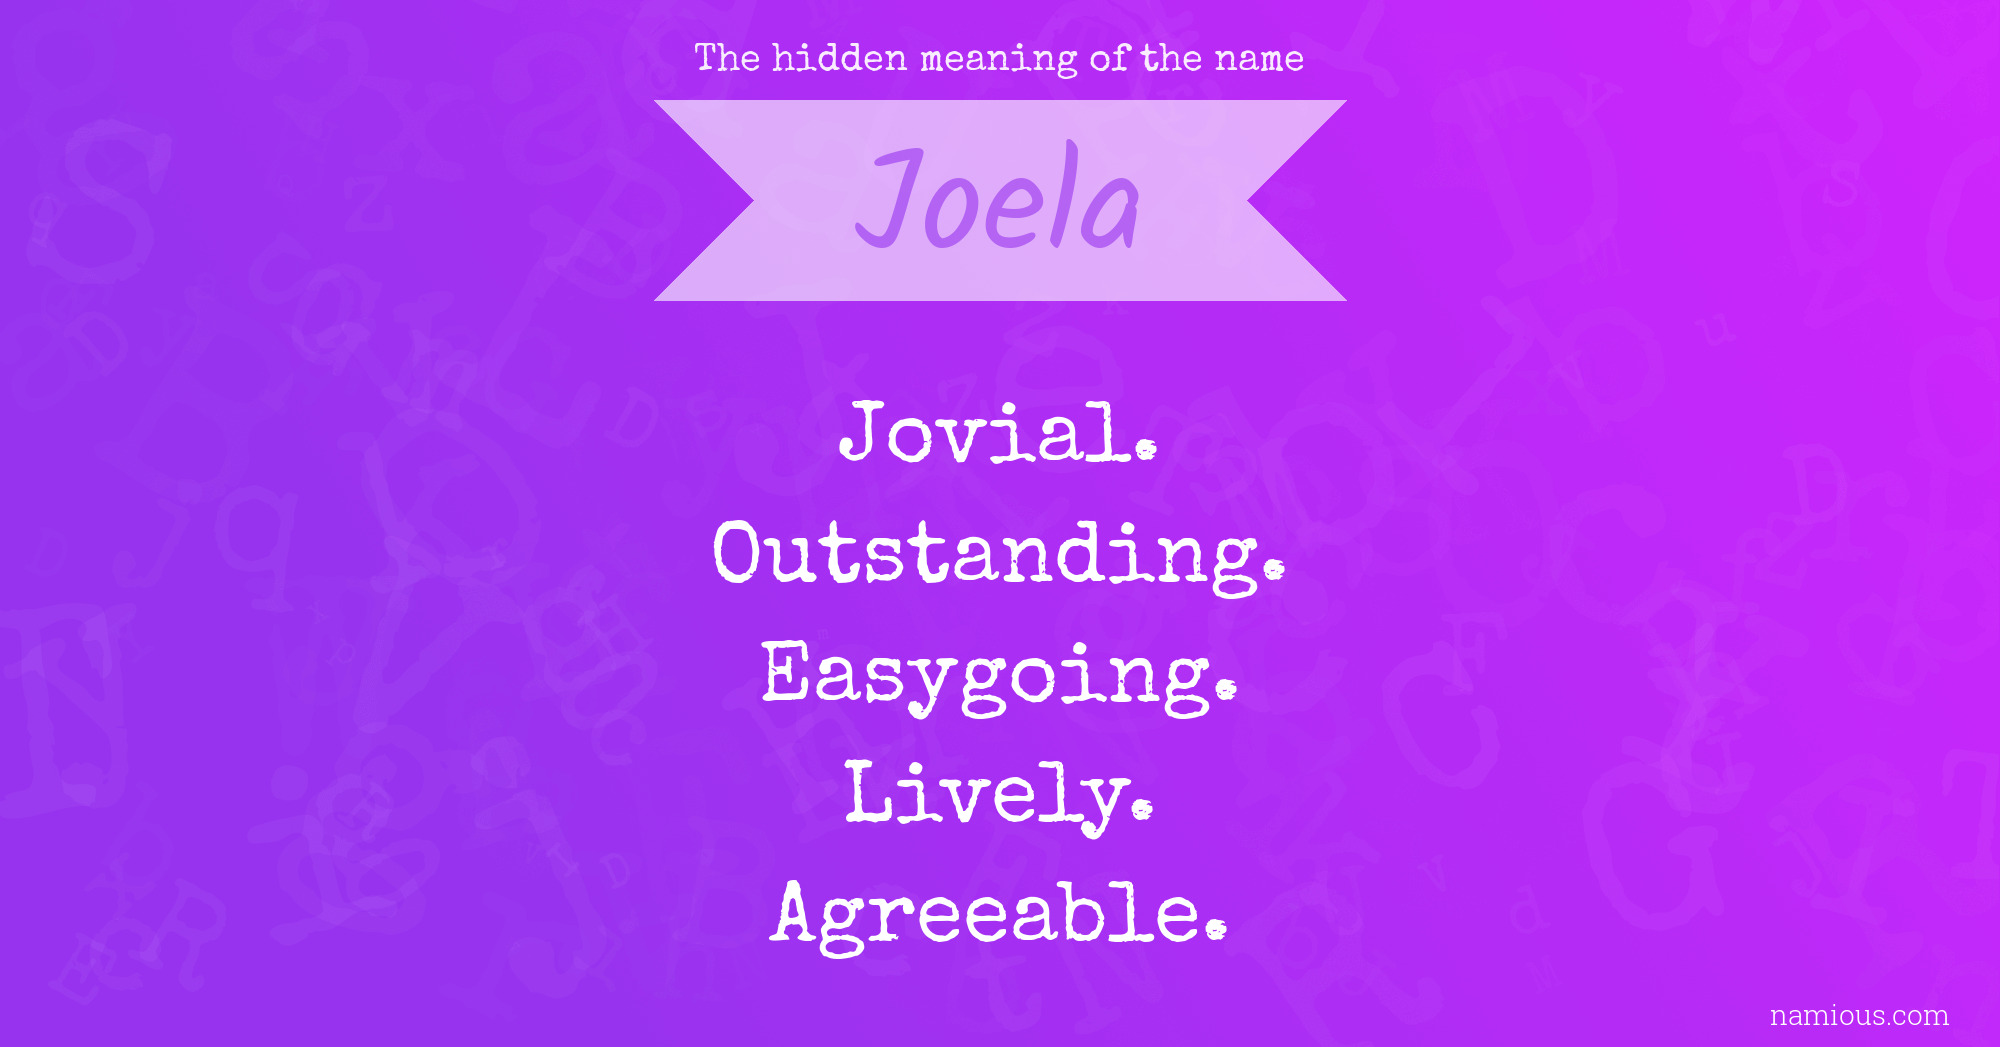 The hidden meaning of the name Joela